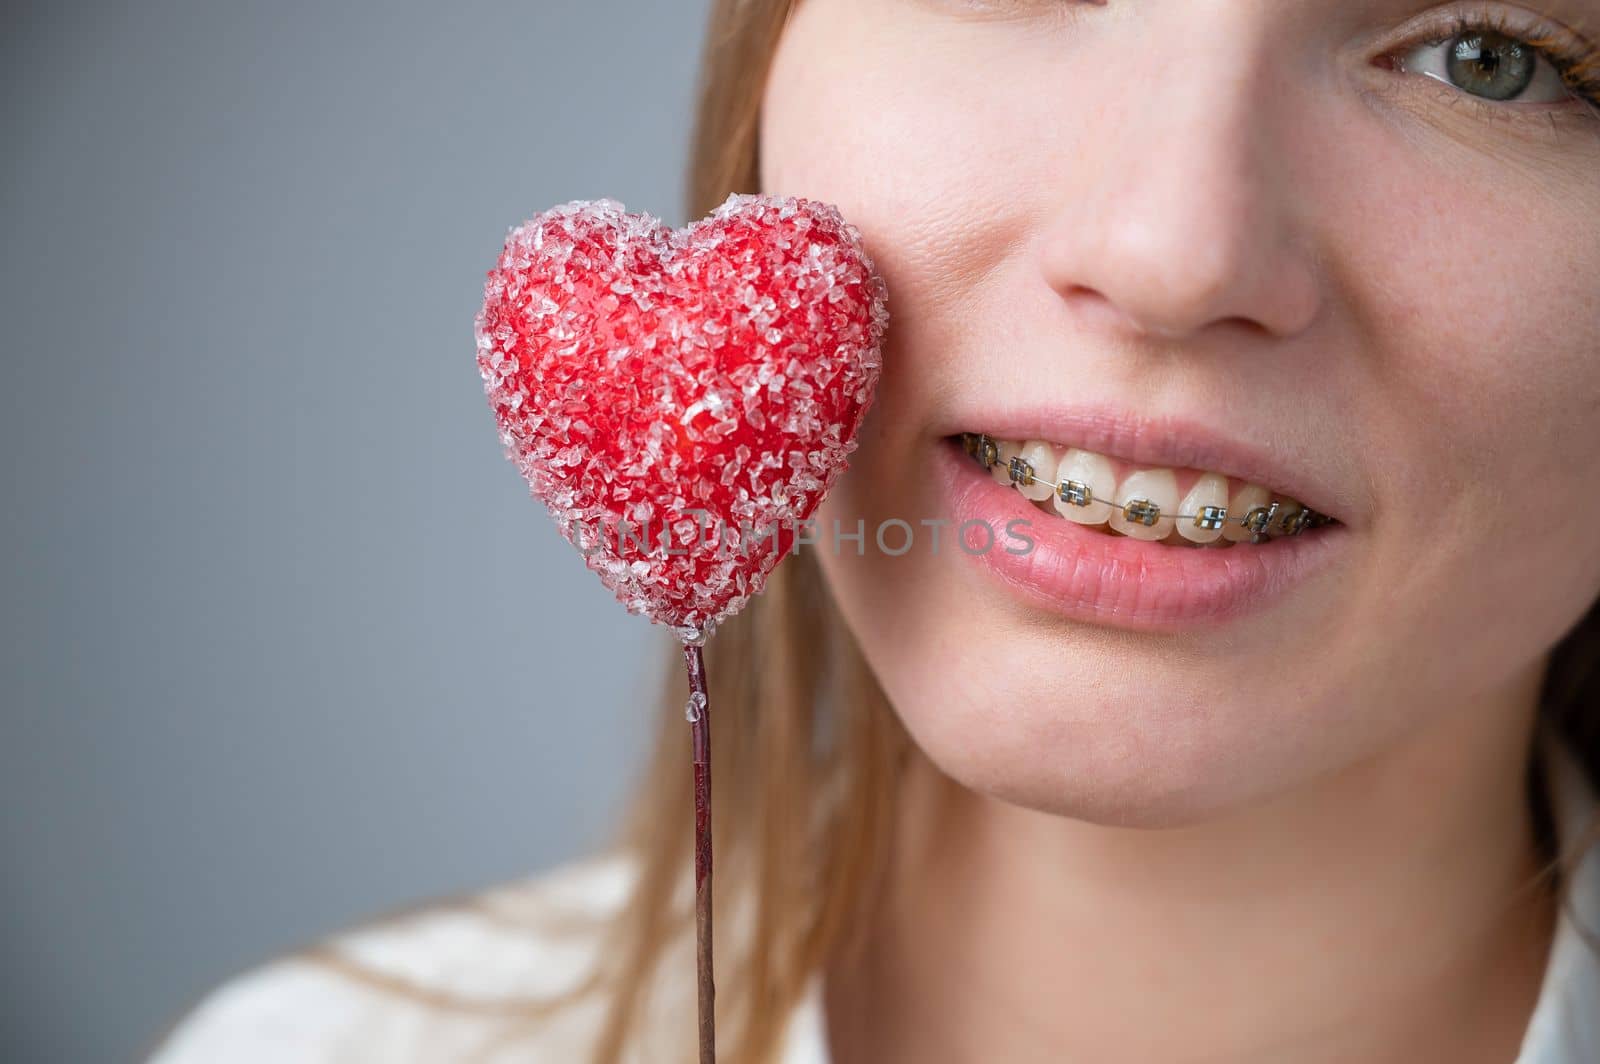 Cute woman with braces on her teeth holds a candy in the form of a heart on white background.